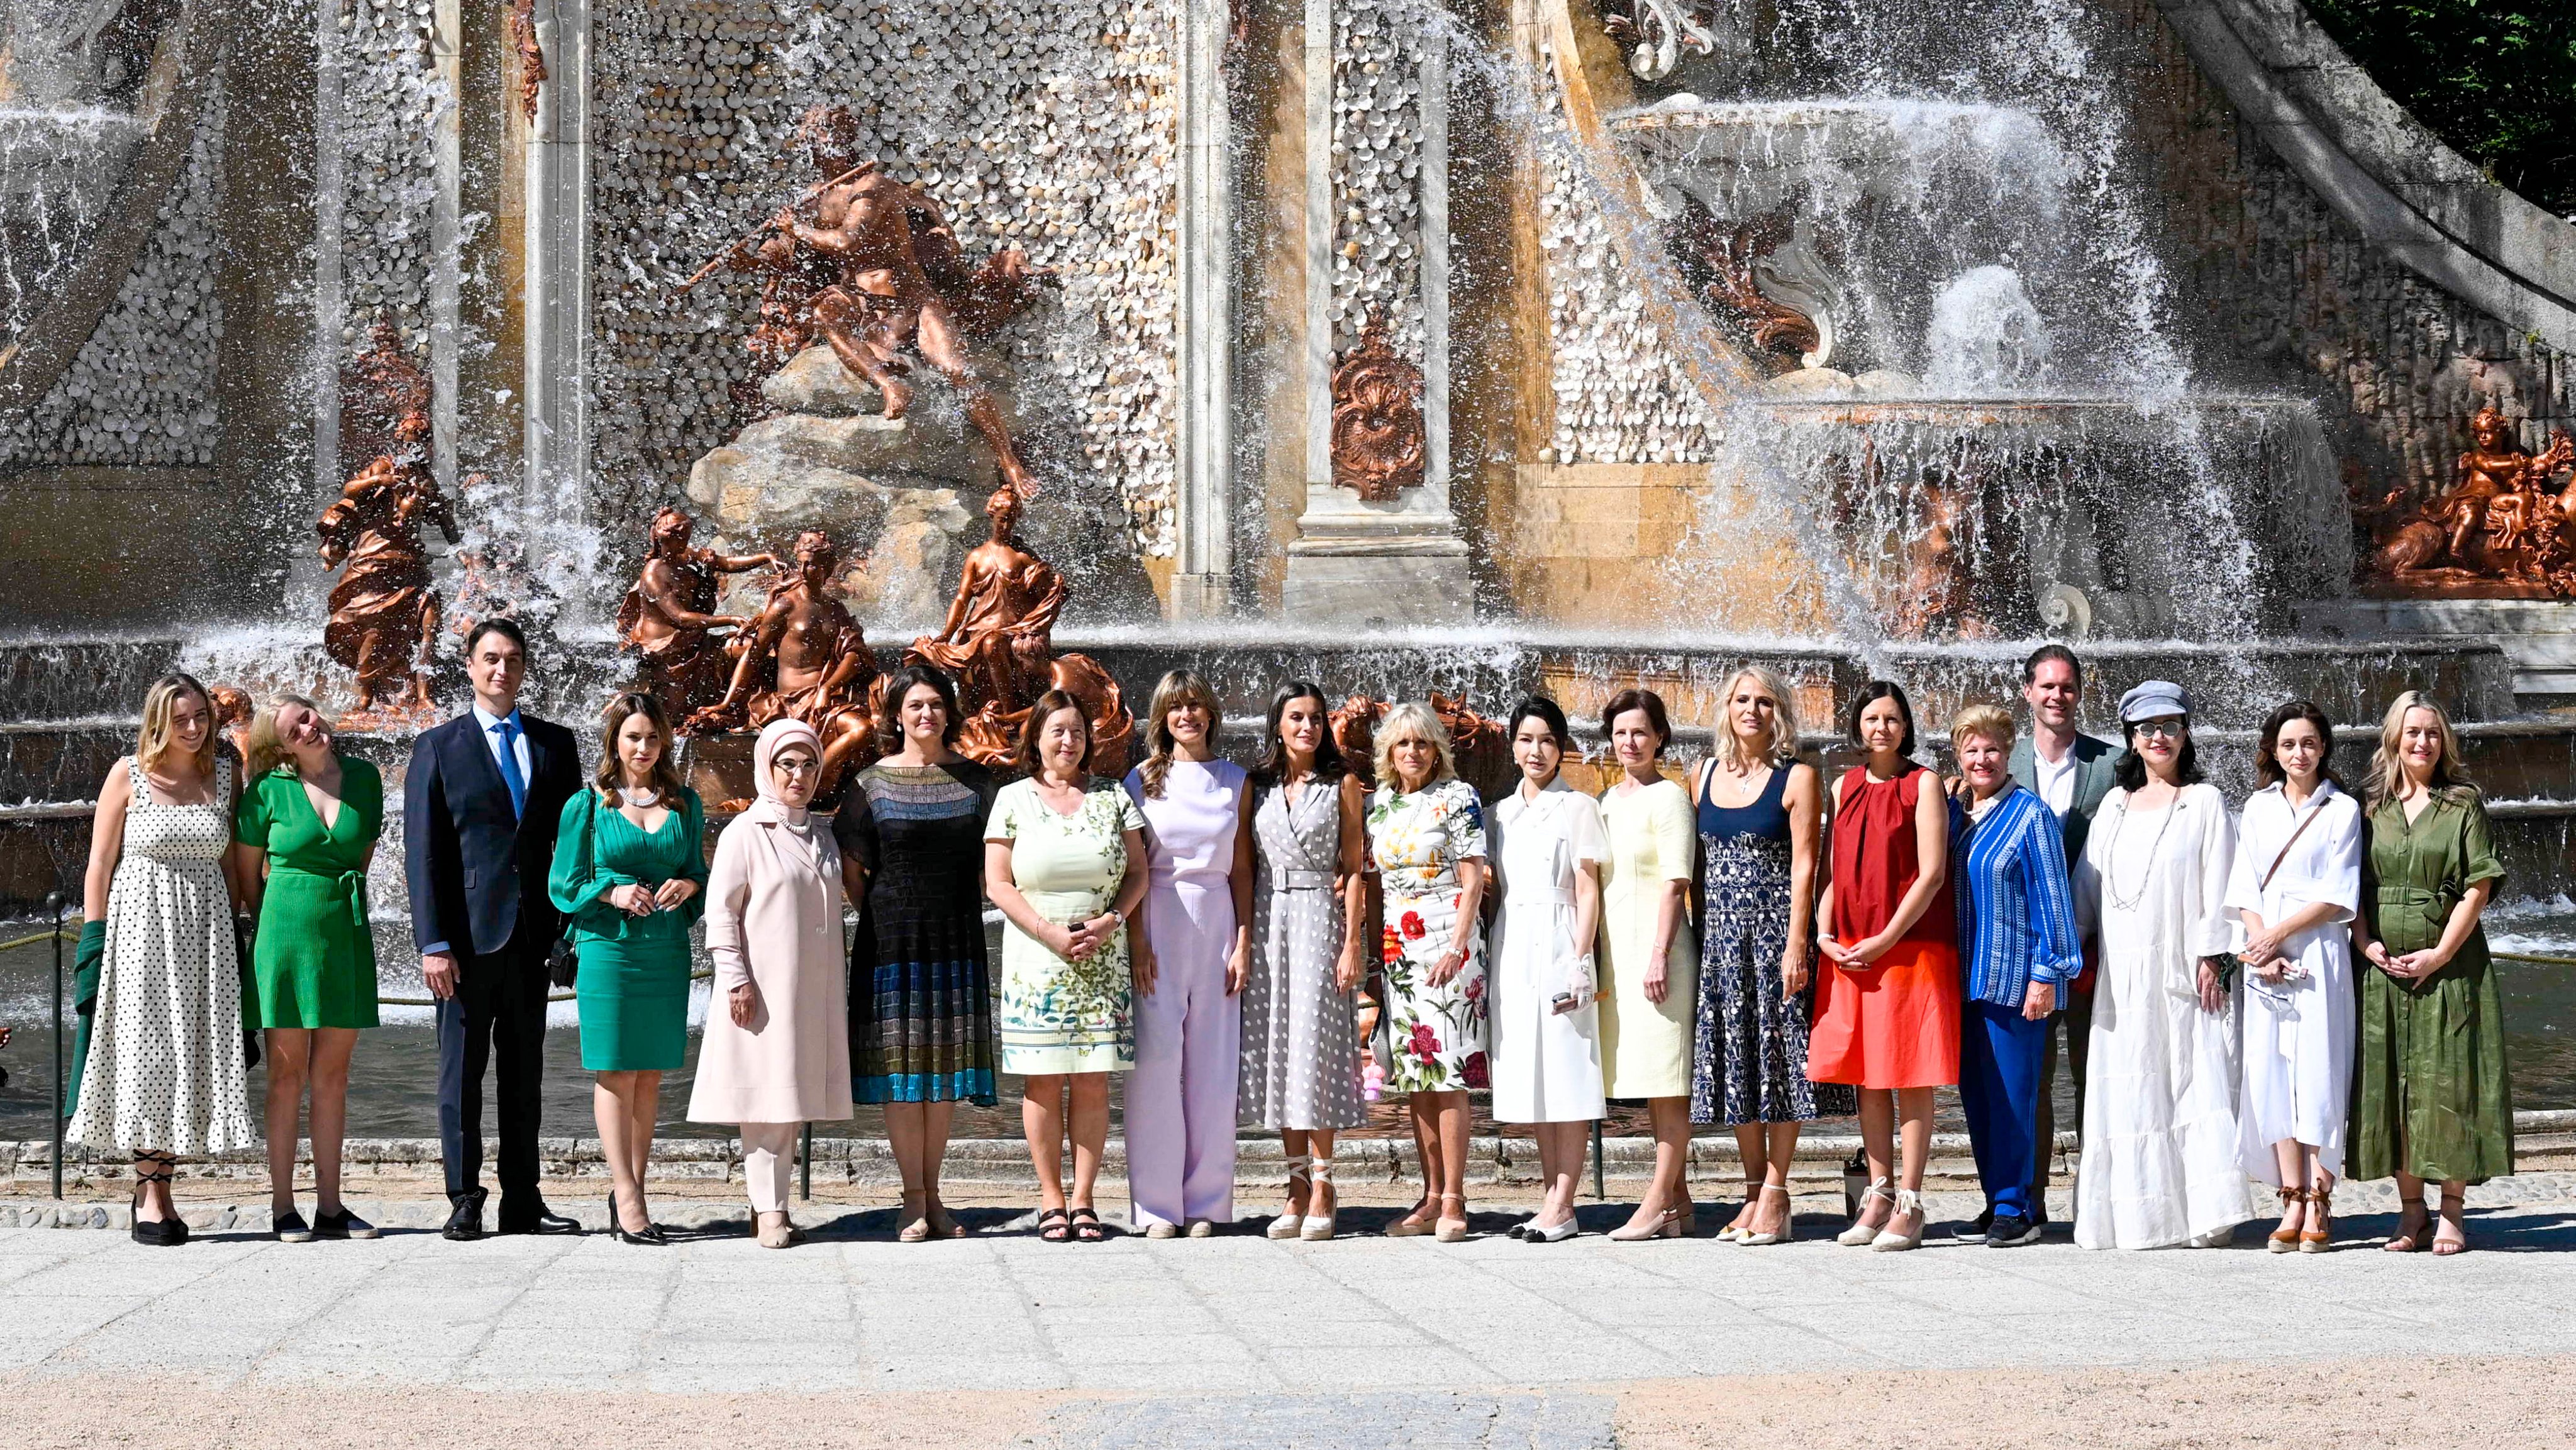 Queen Letizia Hosts Meeting With First Ladies During NATO Summit